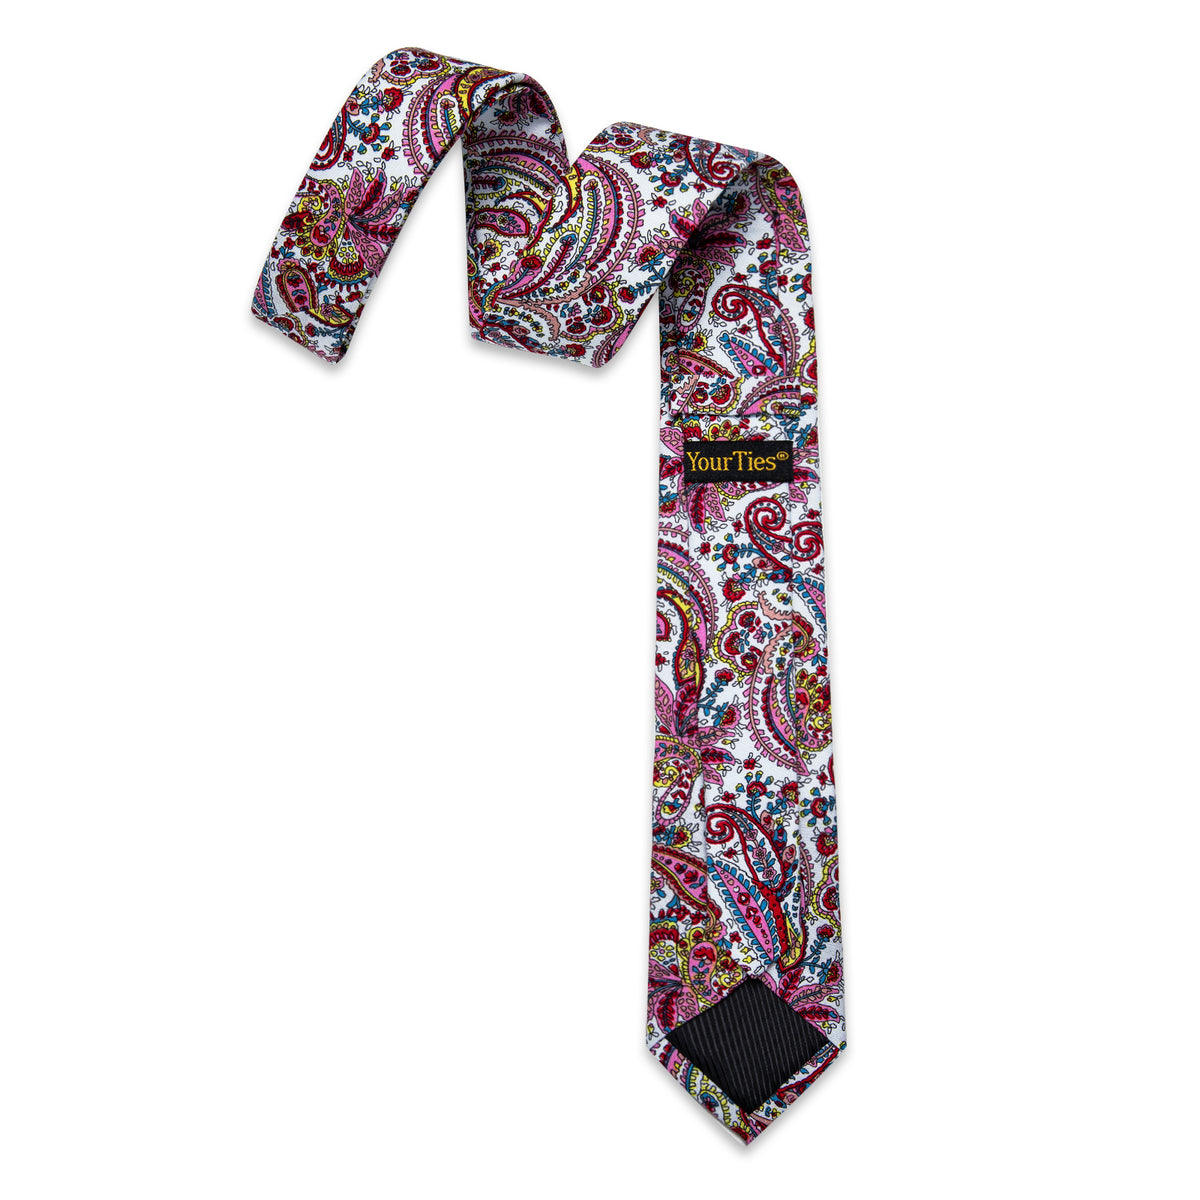 Novelty Floral Printed Skinny Tie Set with Tie Clip